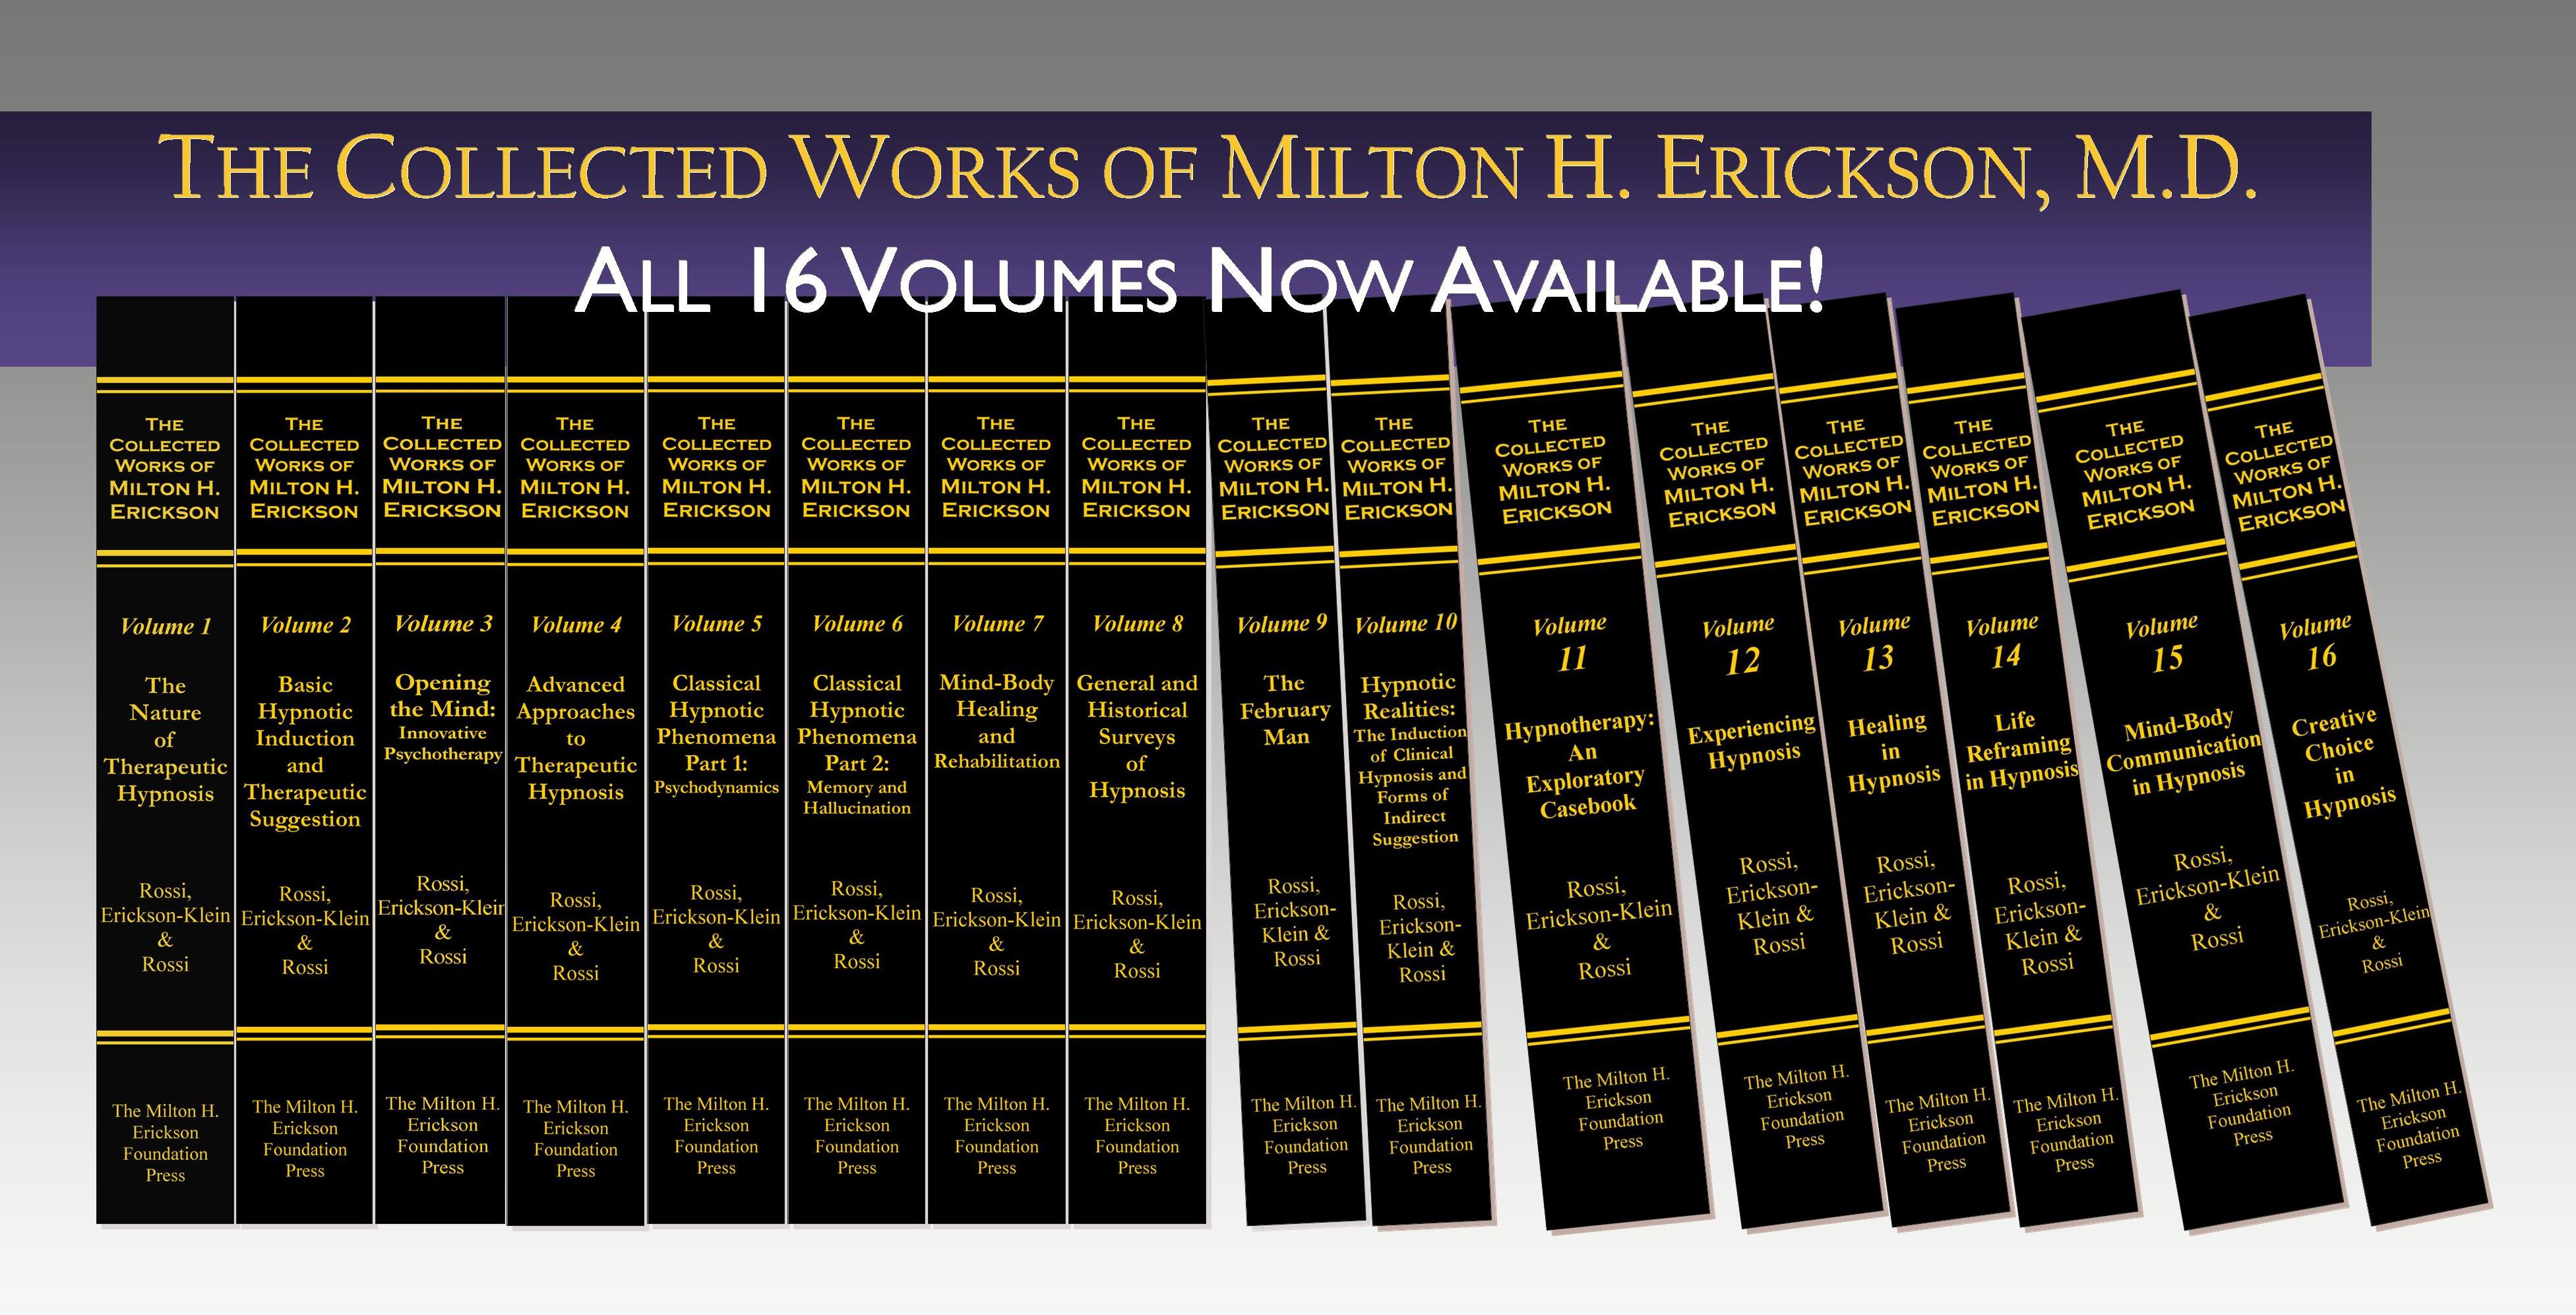 The Collected Works of Milton H. Erickson